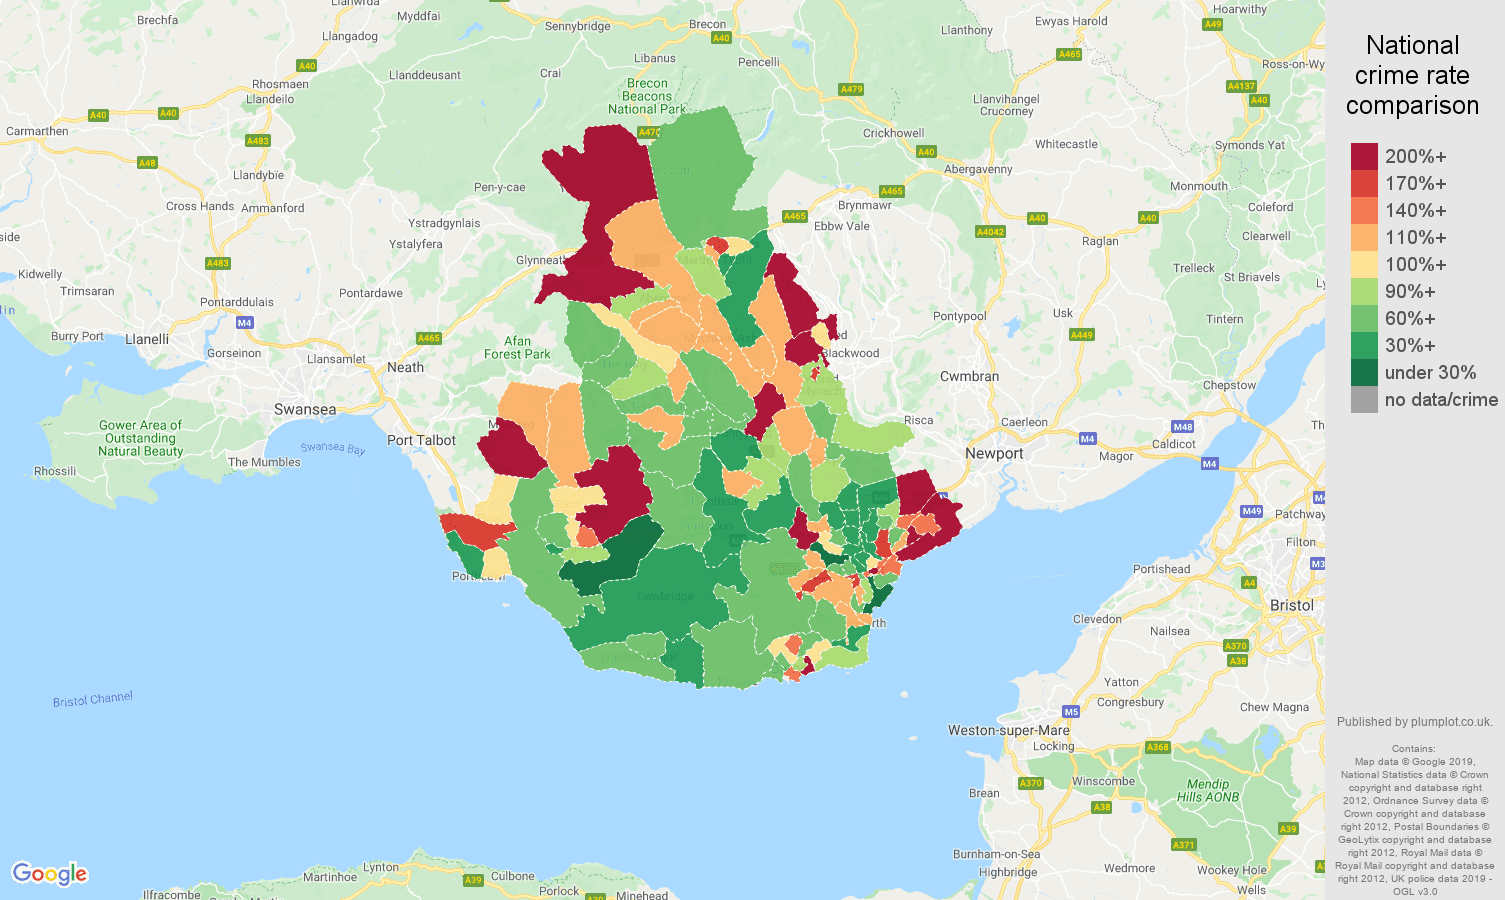 Cardiff other crime rate comparison map